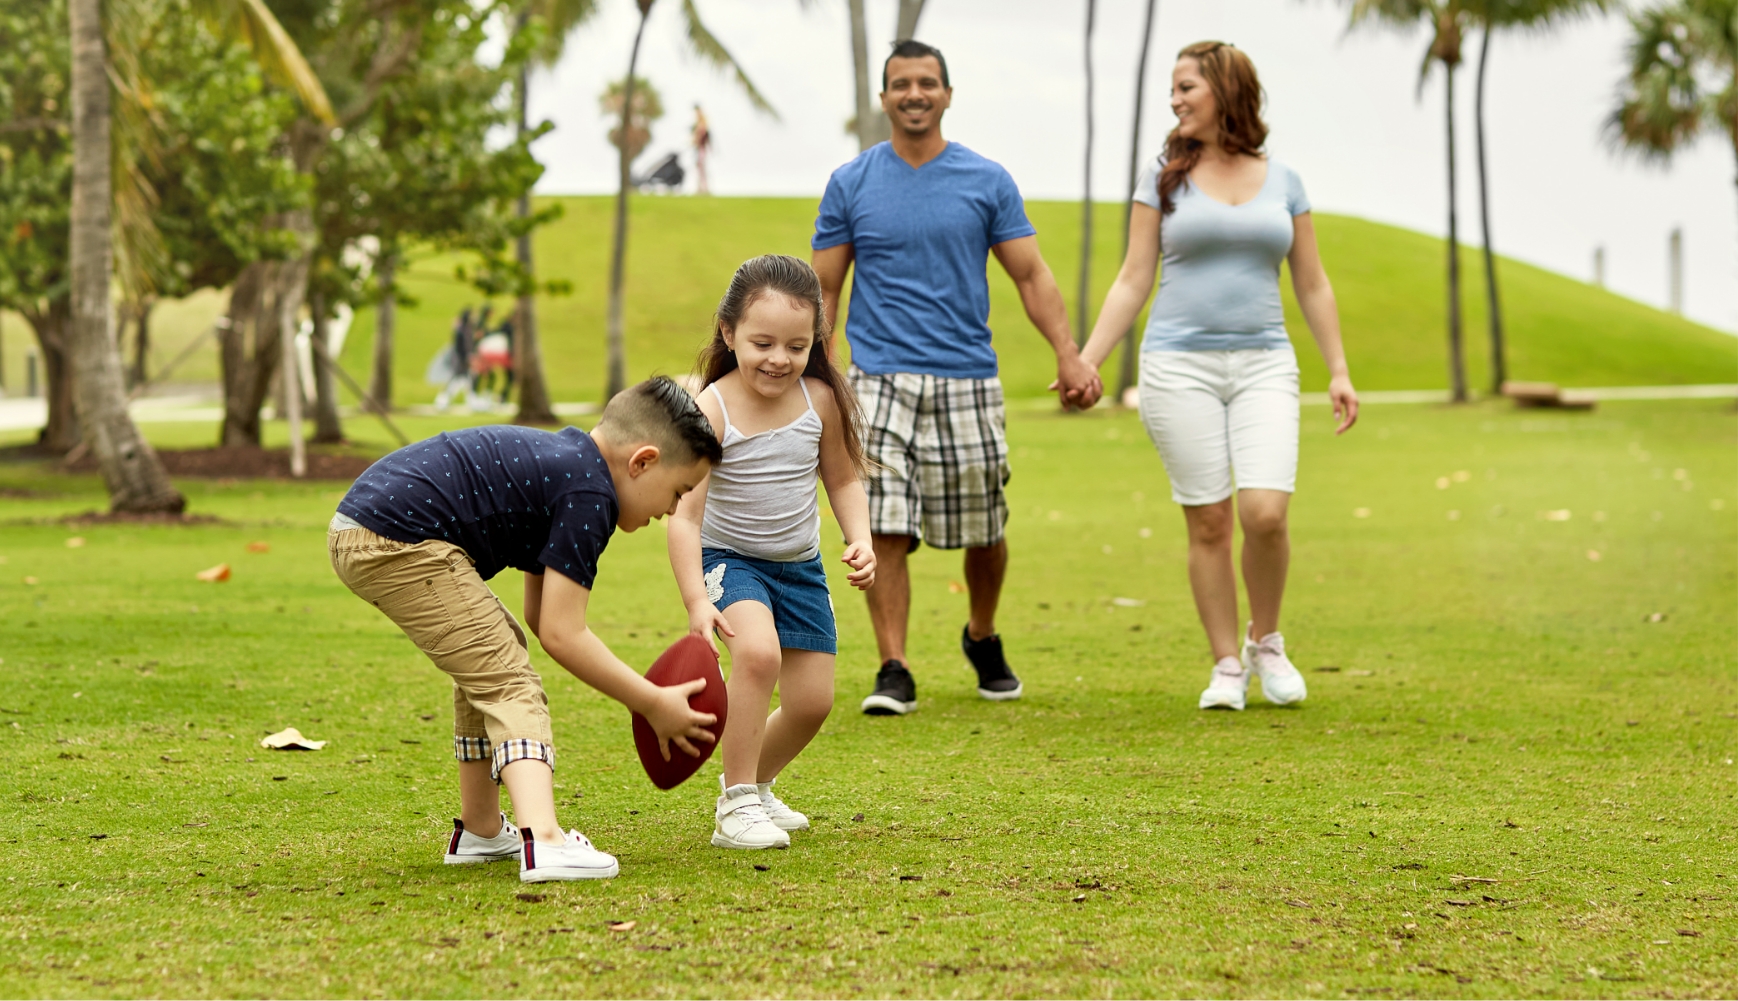 Family playing football on grassy field